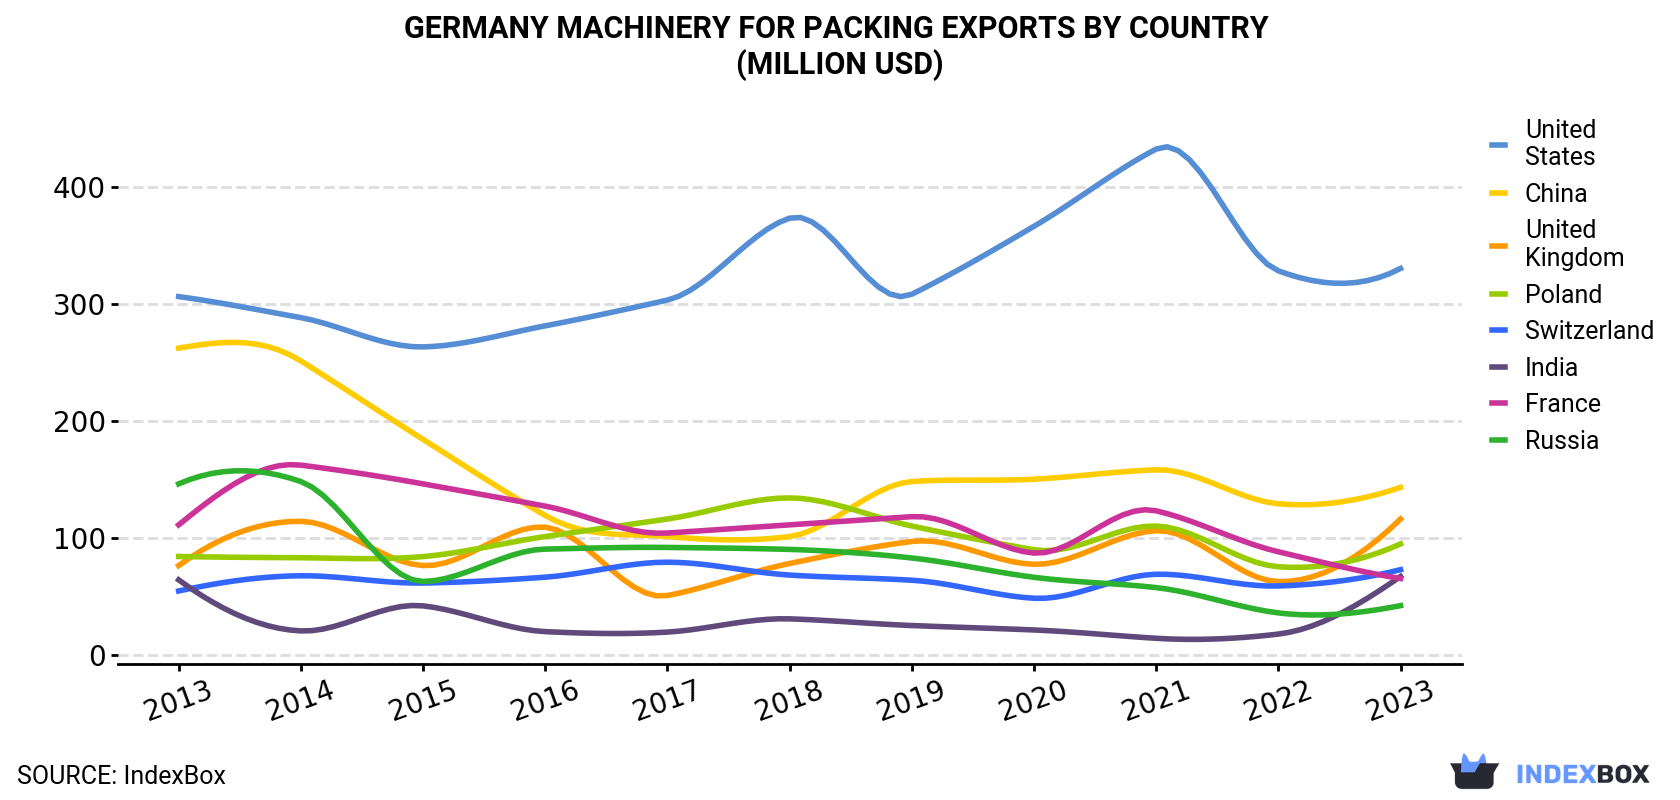 Germany Machinery For Packing Exports By Country (Million USD)